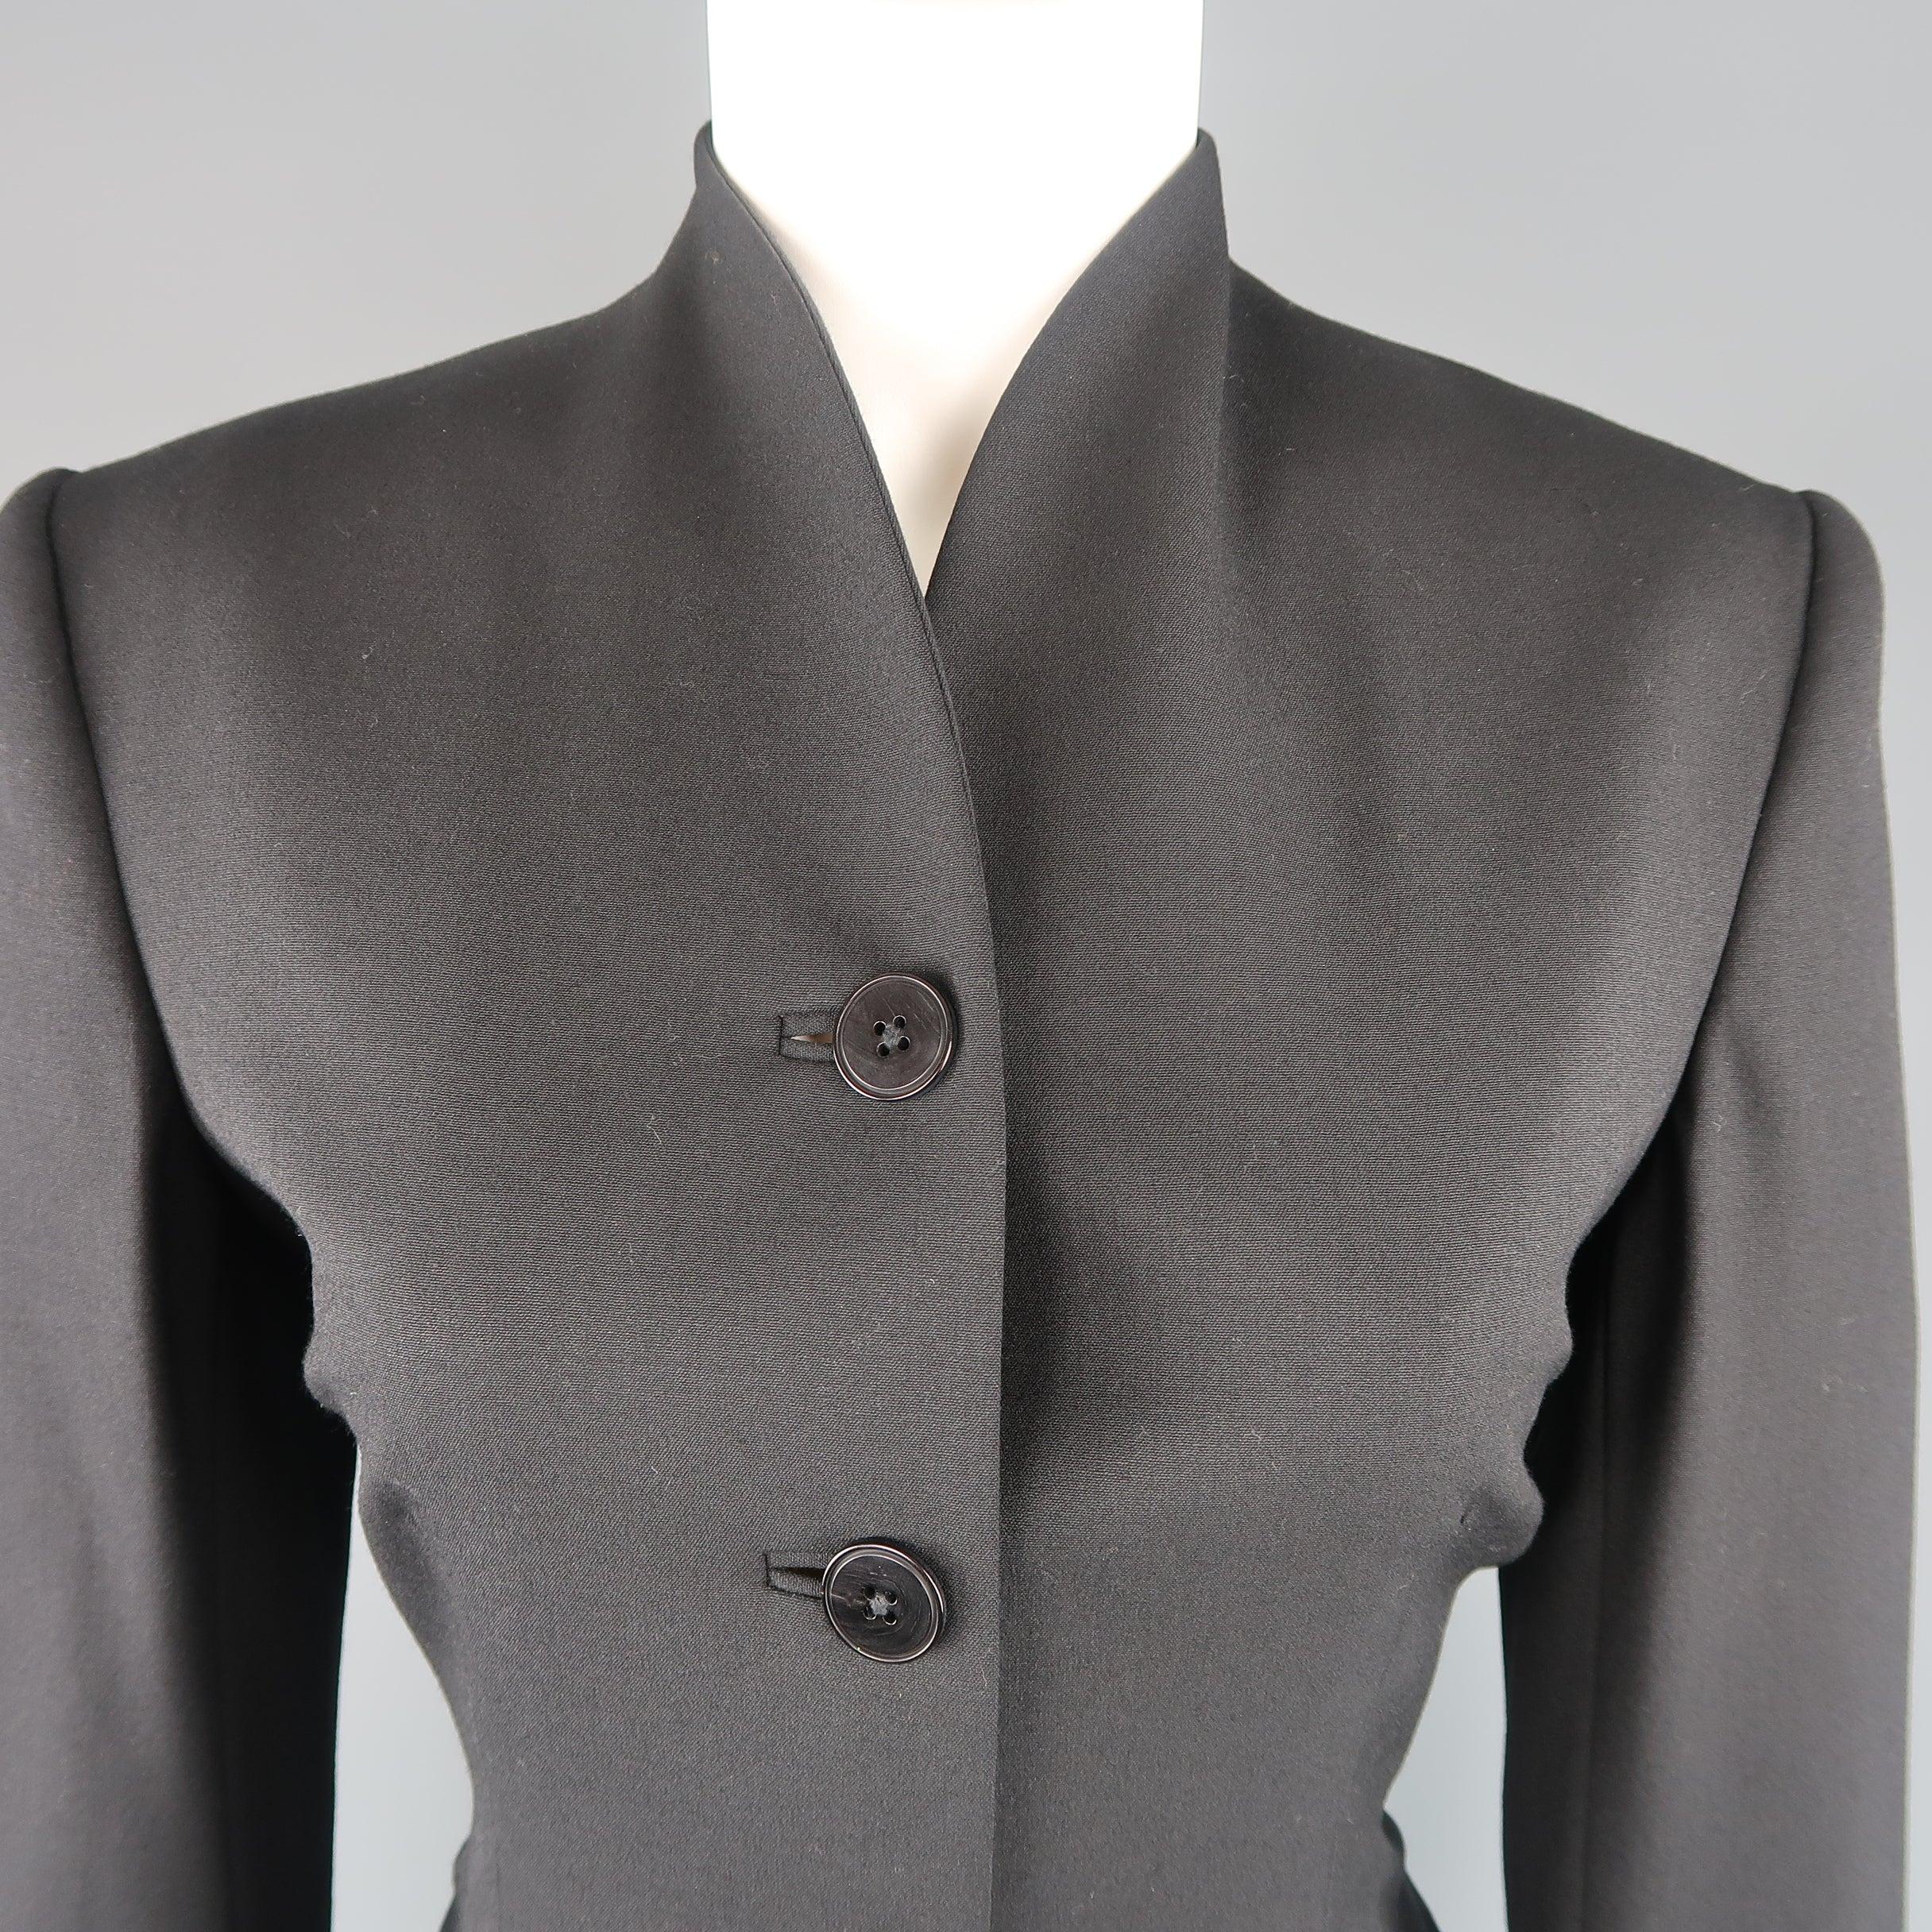 RALPH LAUREN BLACK LABEL jacket comes in black wool with a four button front, cropped,tailored silhouette, and stand up collar. Small imperfection on back. Made in USA.
Good Pre-Owned Condition.
 

Marked:   6
 

Measurements: 
  
l	Shoulder: 16